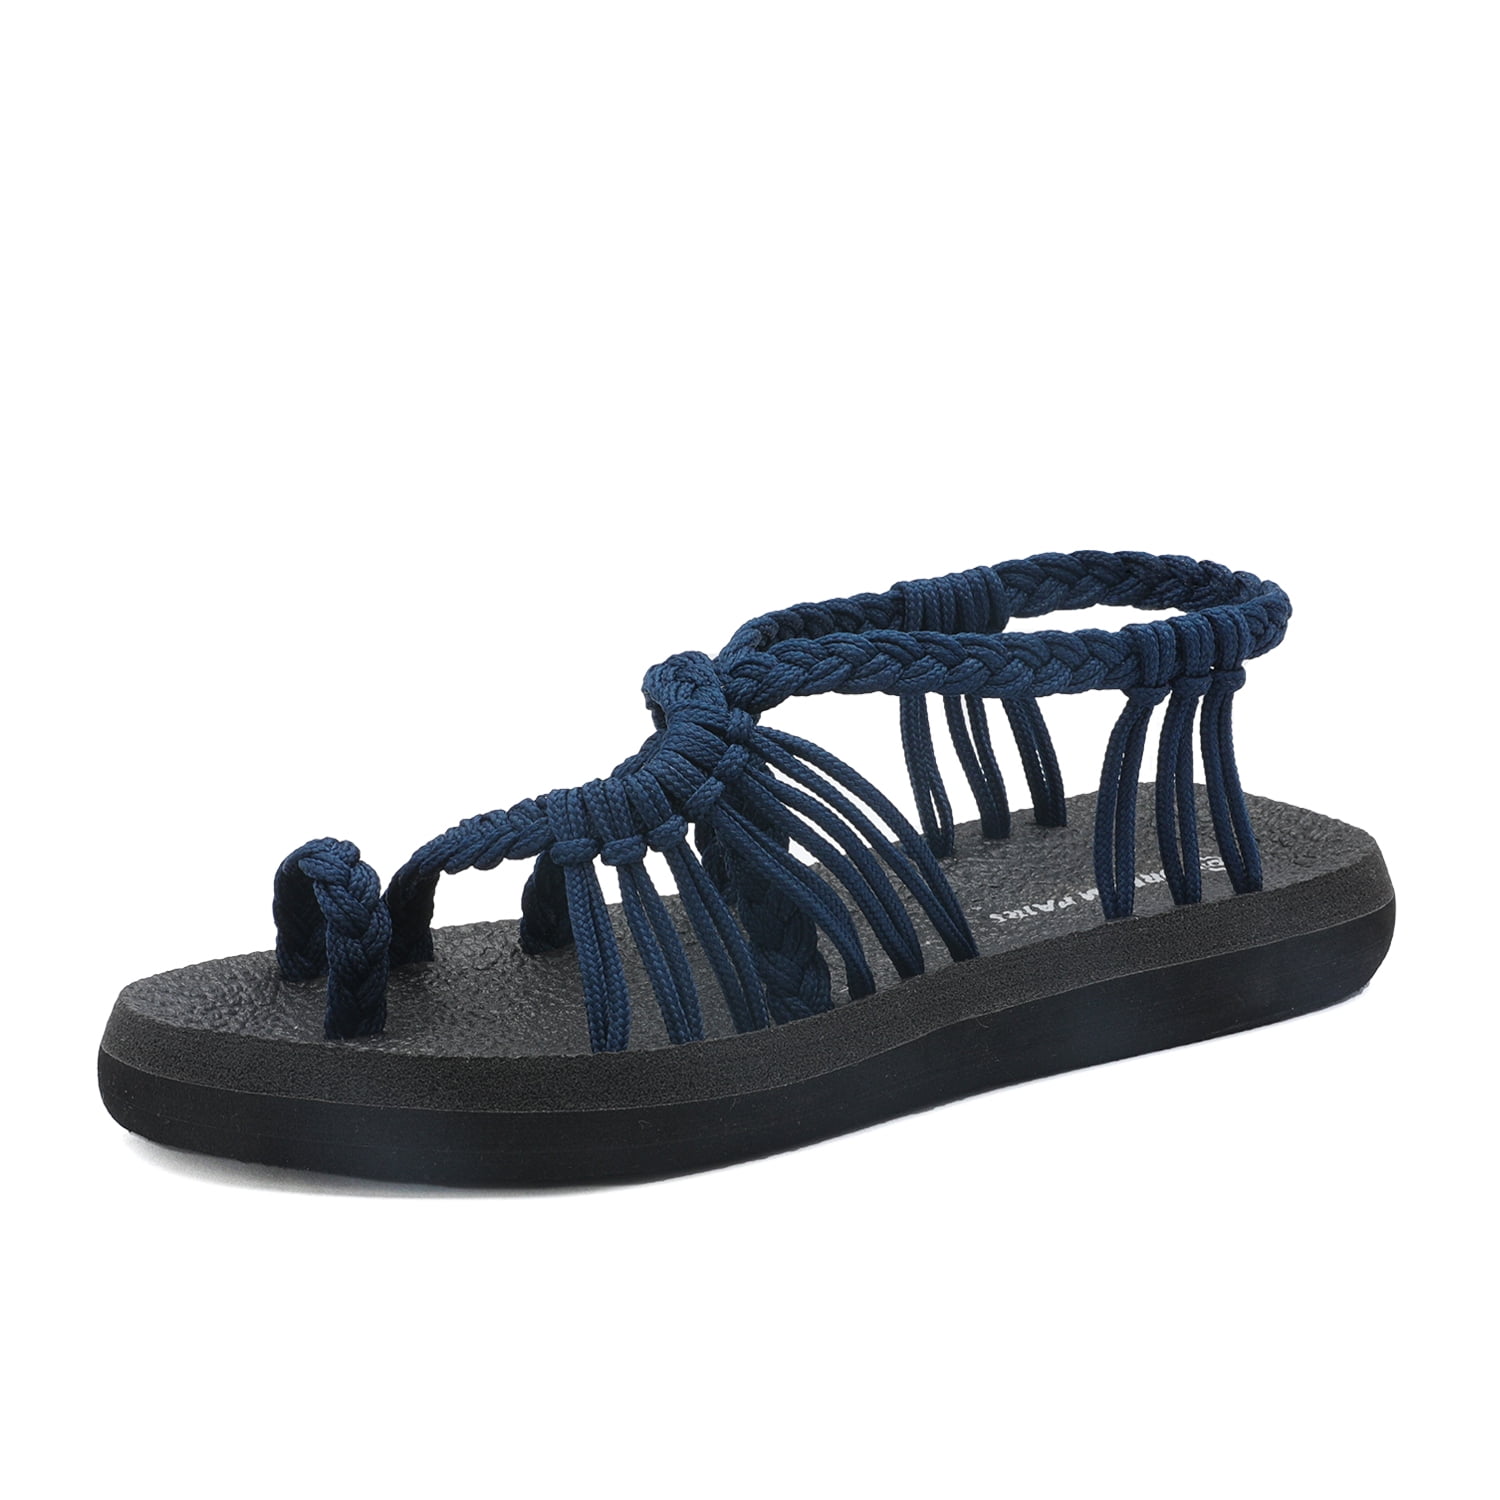 SANDALUP Sandals for Women Summer with Handmade Sole and Braided Strap